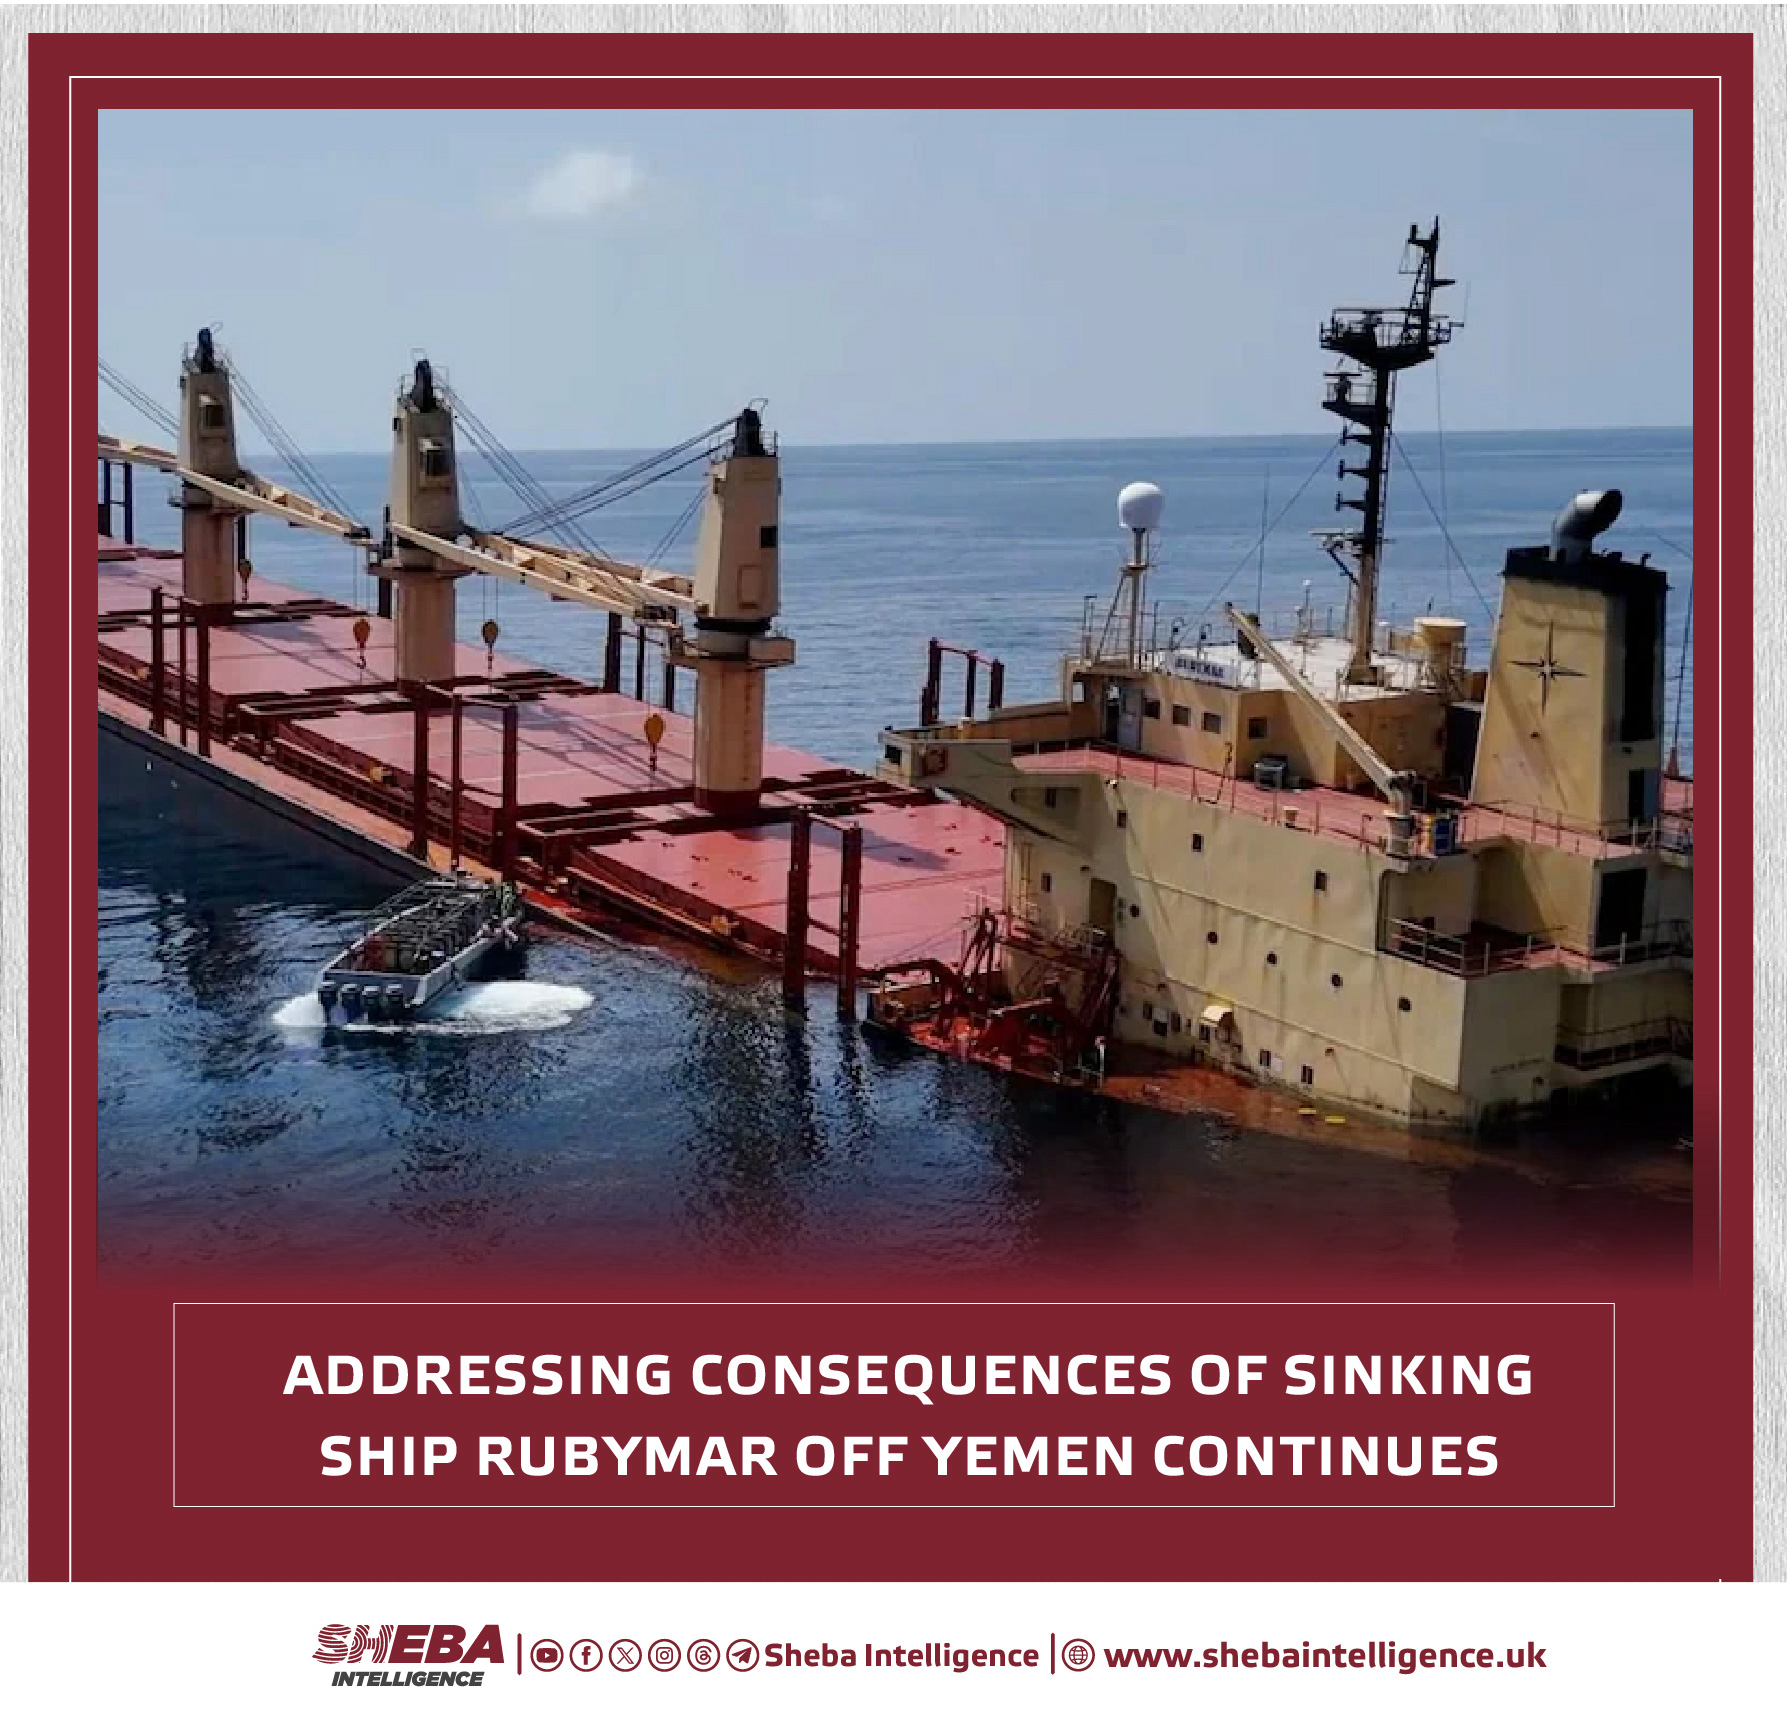 Addressing Consequences of Sinking Ship Rubymar off Yemen Continues